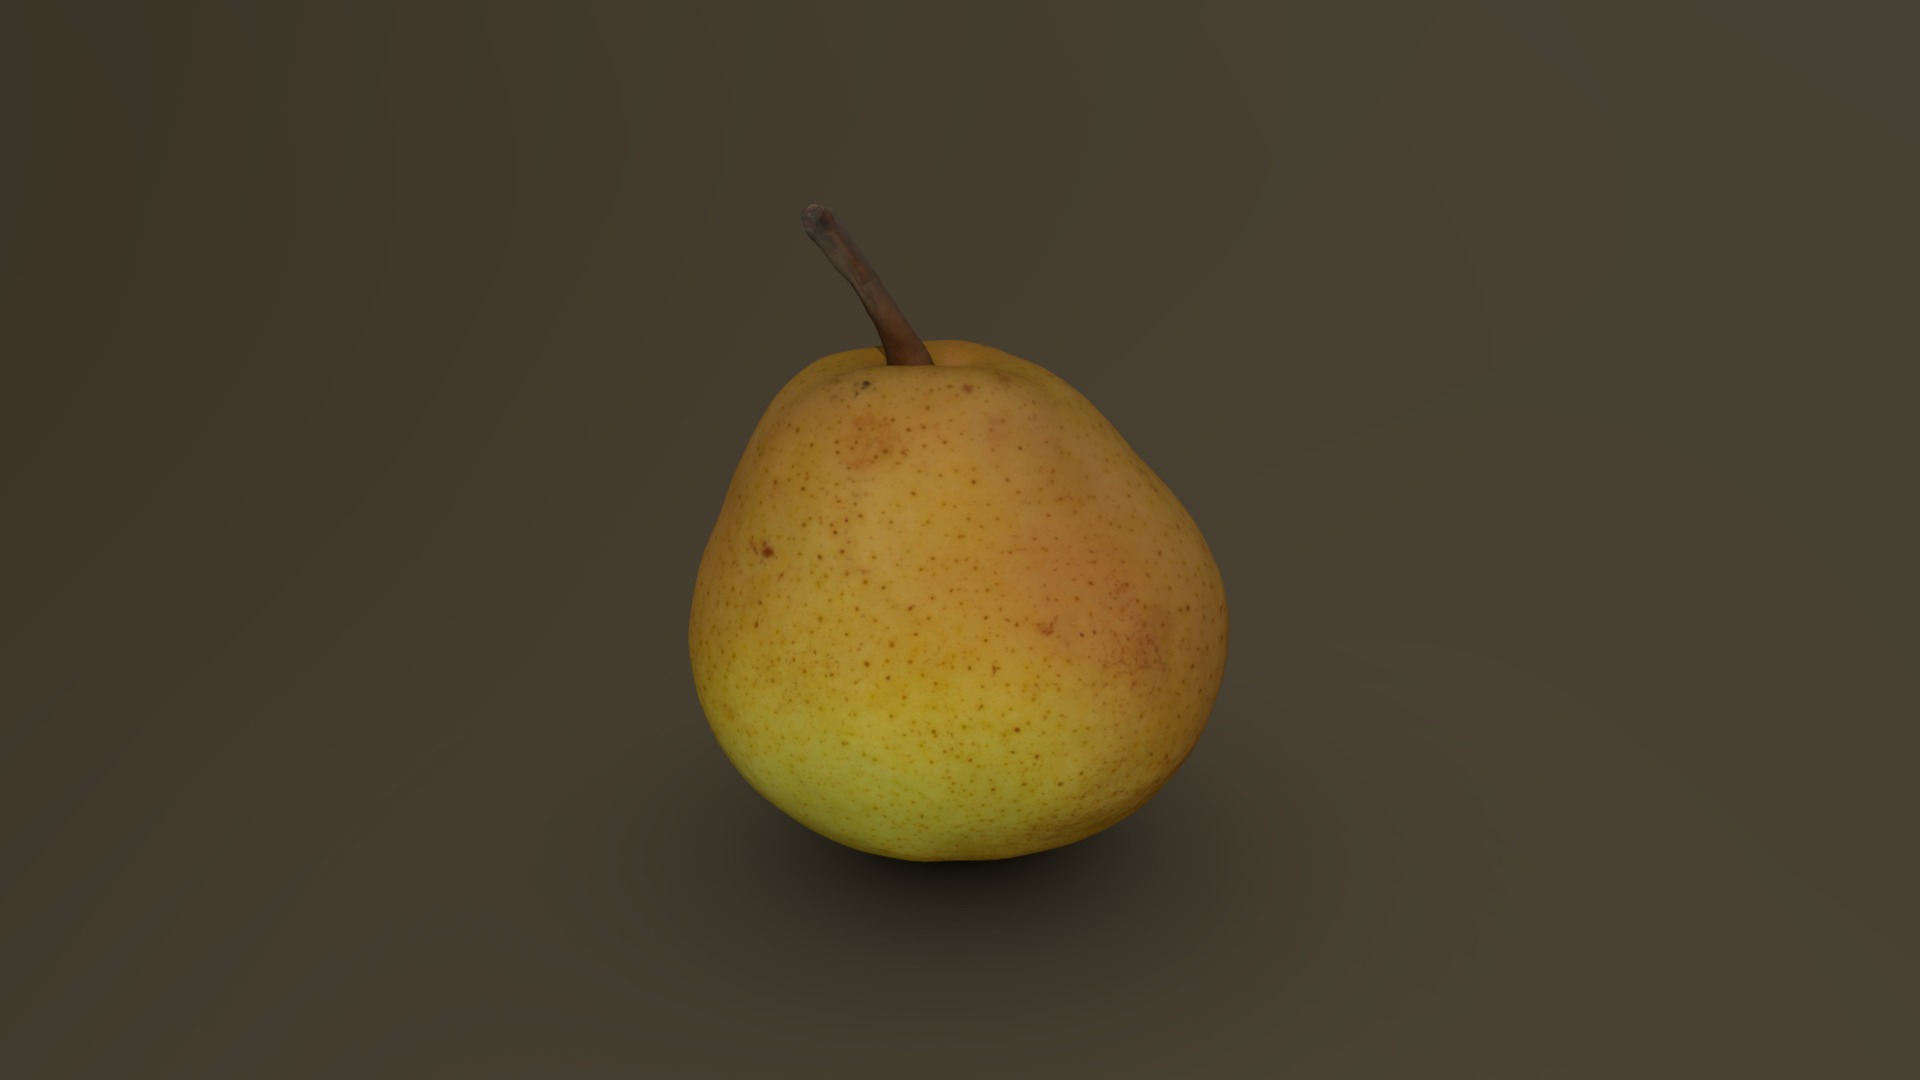 3D model Pear 10 - This is a 3D model of the Pear 10. The 3D model is about a yellow pear on a black background.